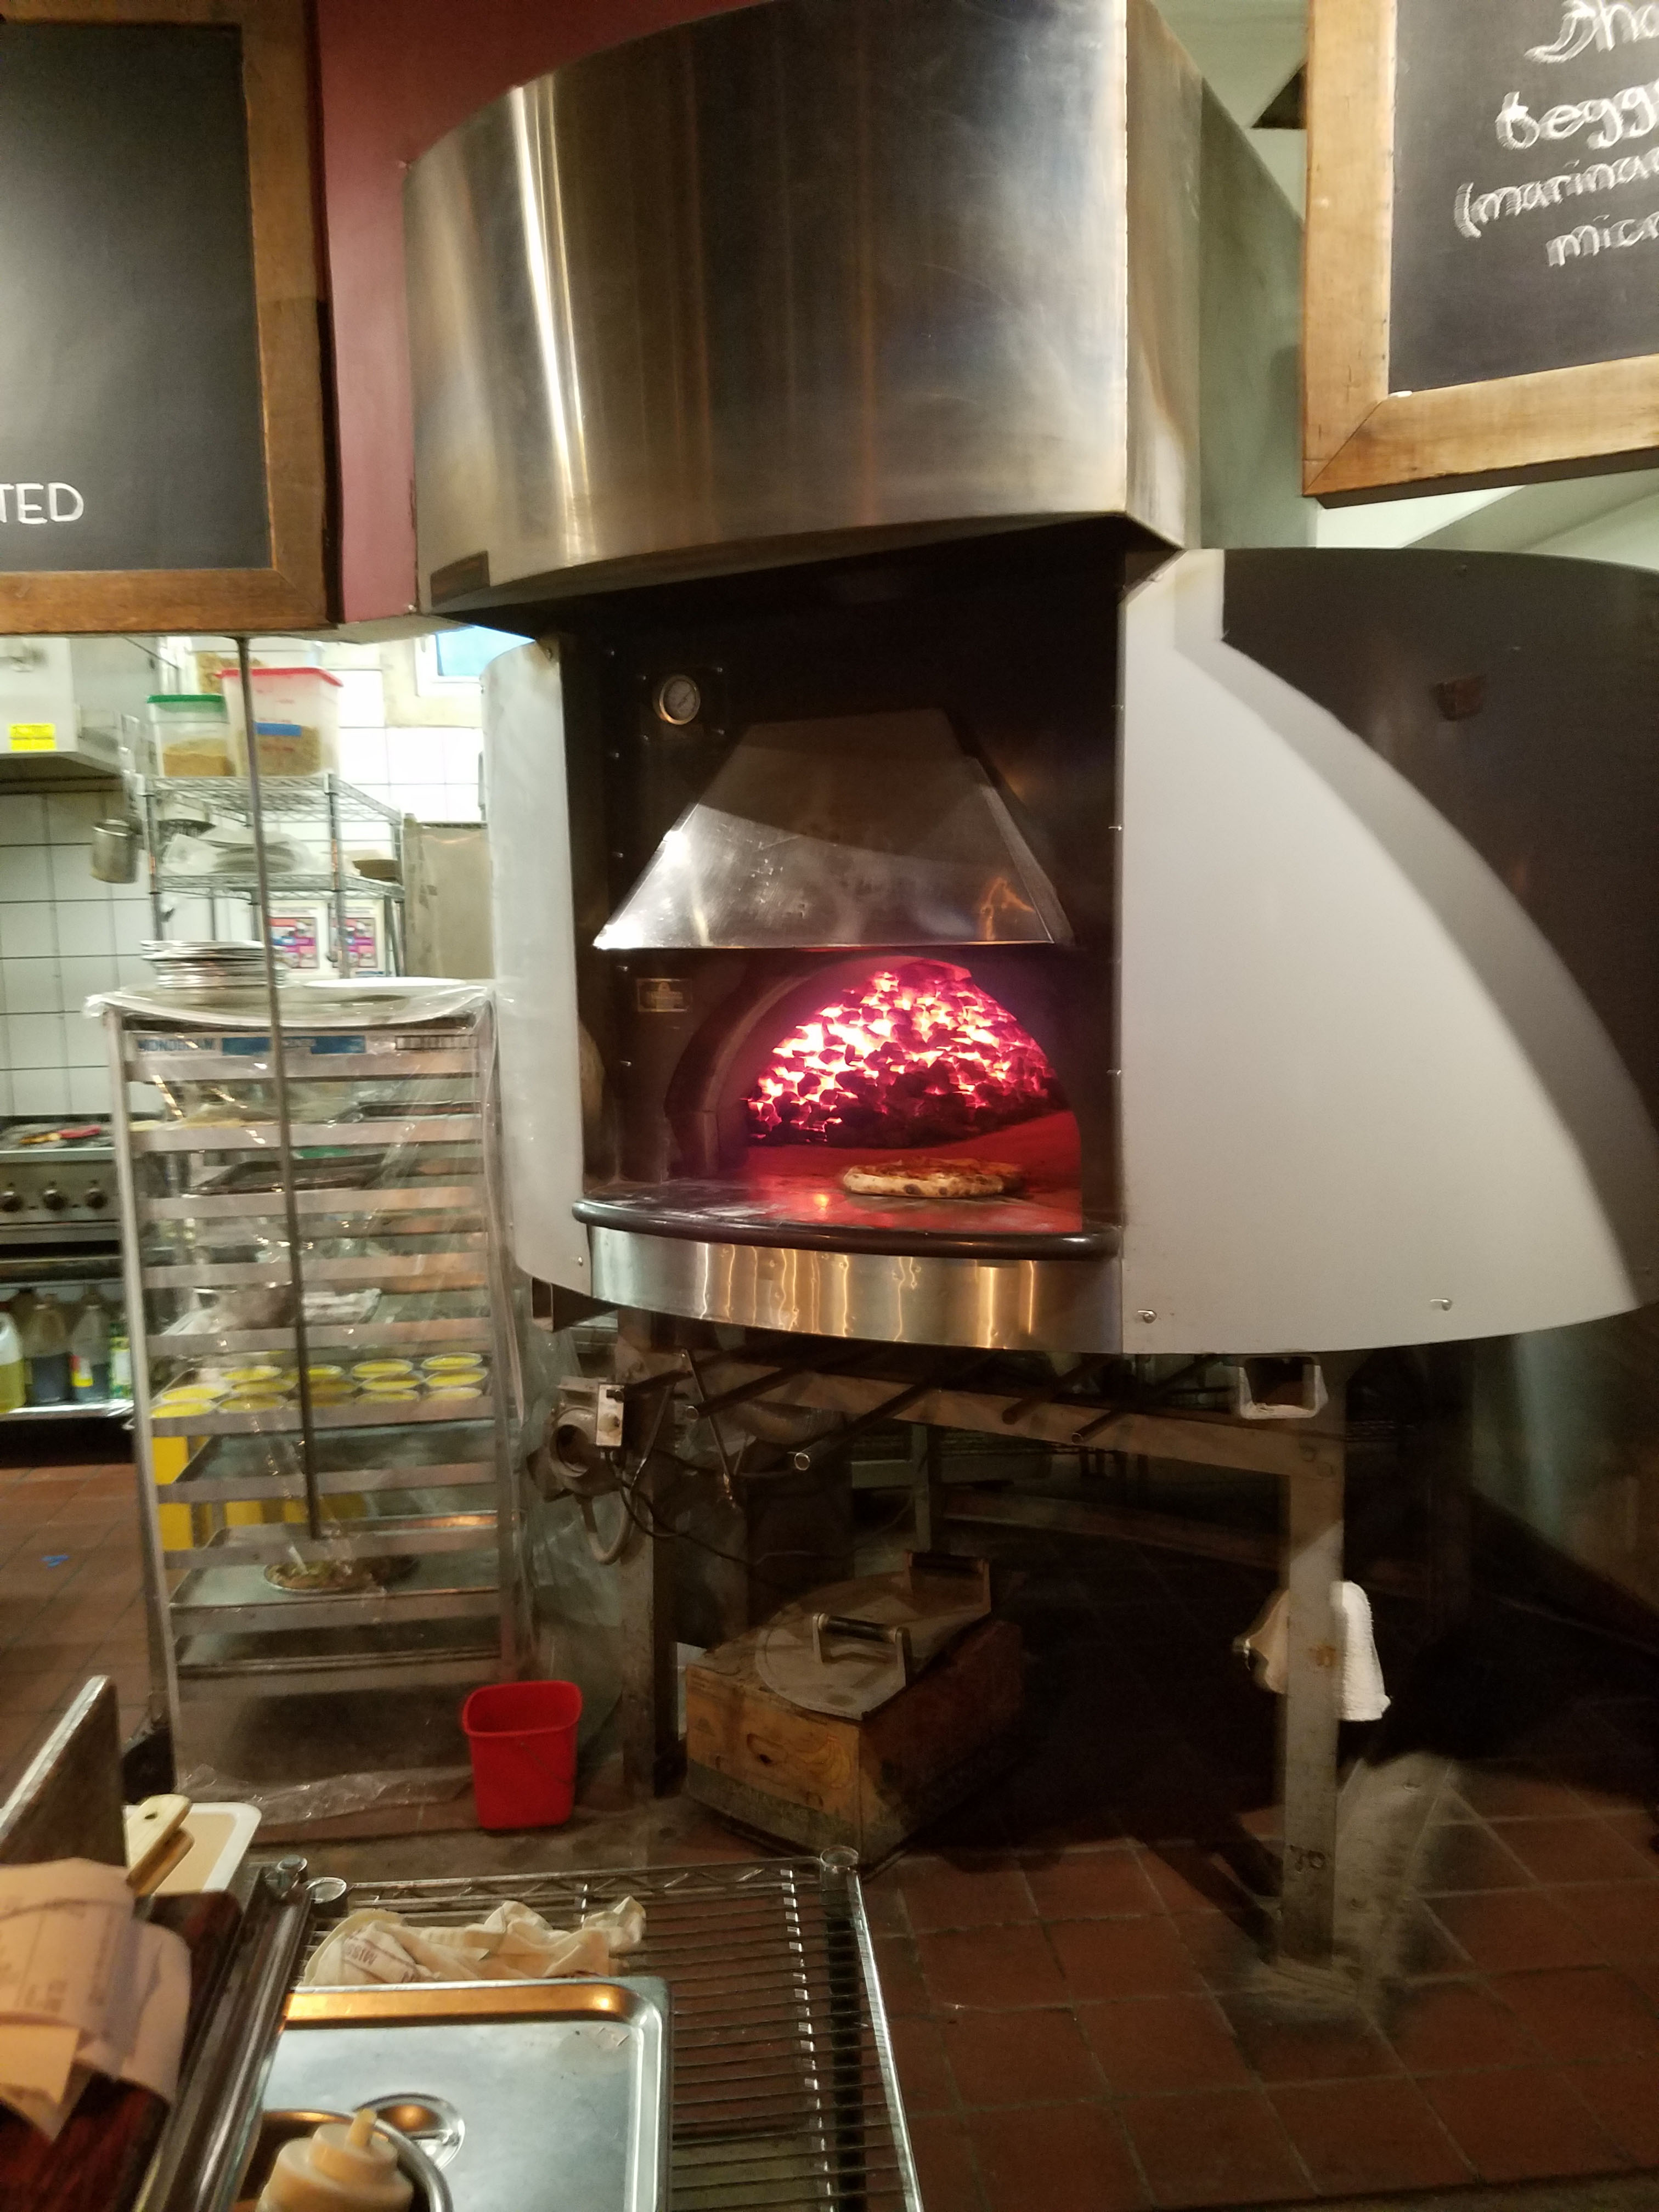 Privateer Coal Fire Pizza